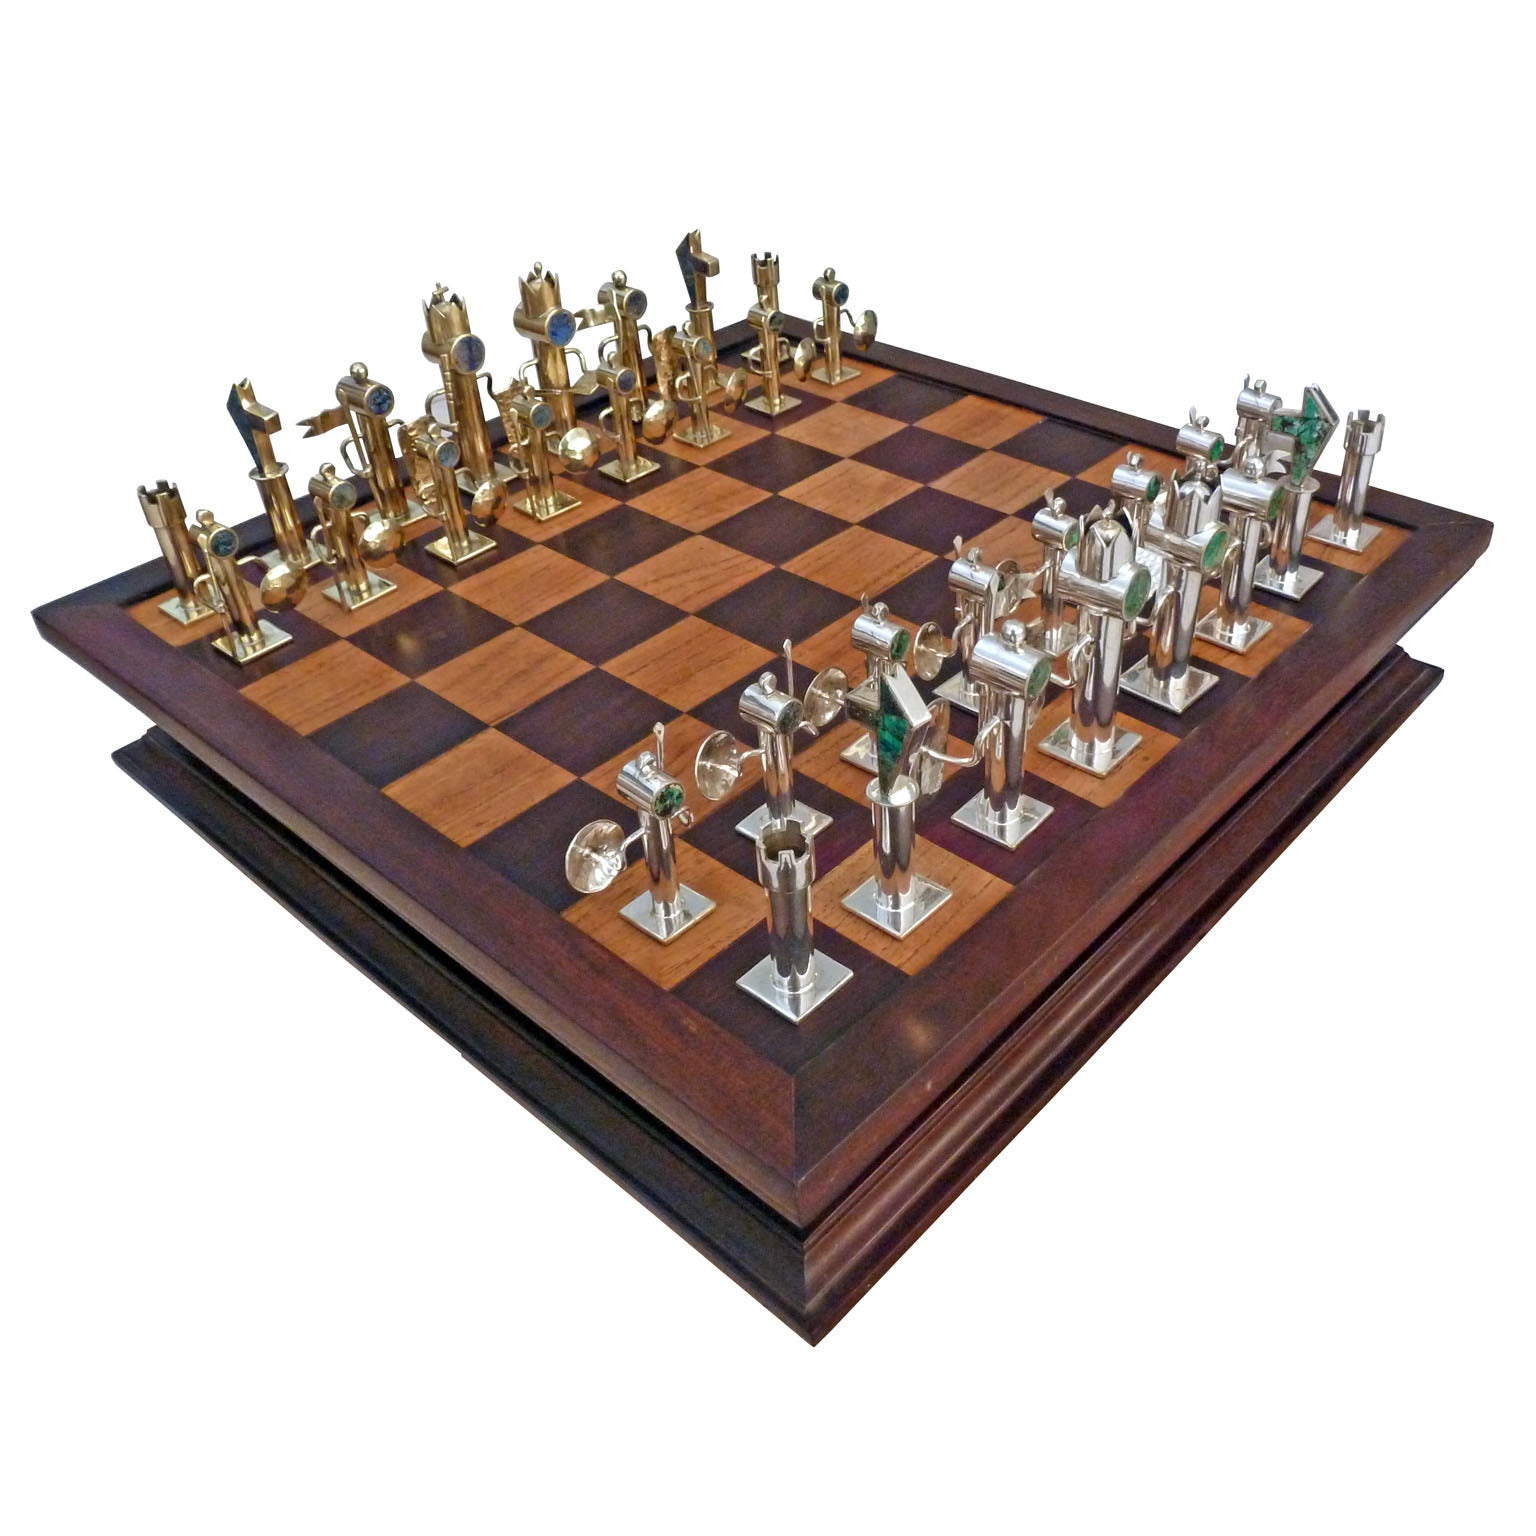 Los Castillo Handcrafted Chess Set in Turquoise and Lapiz Lazuli